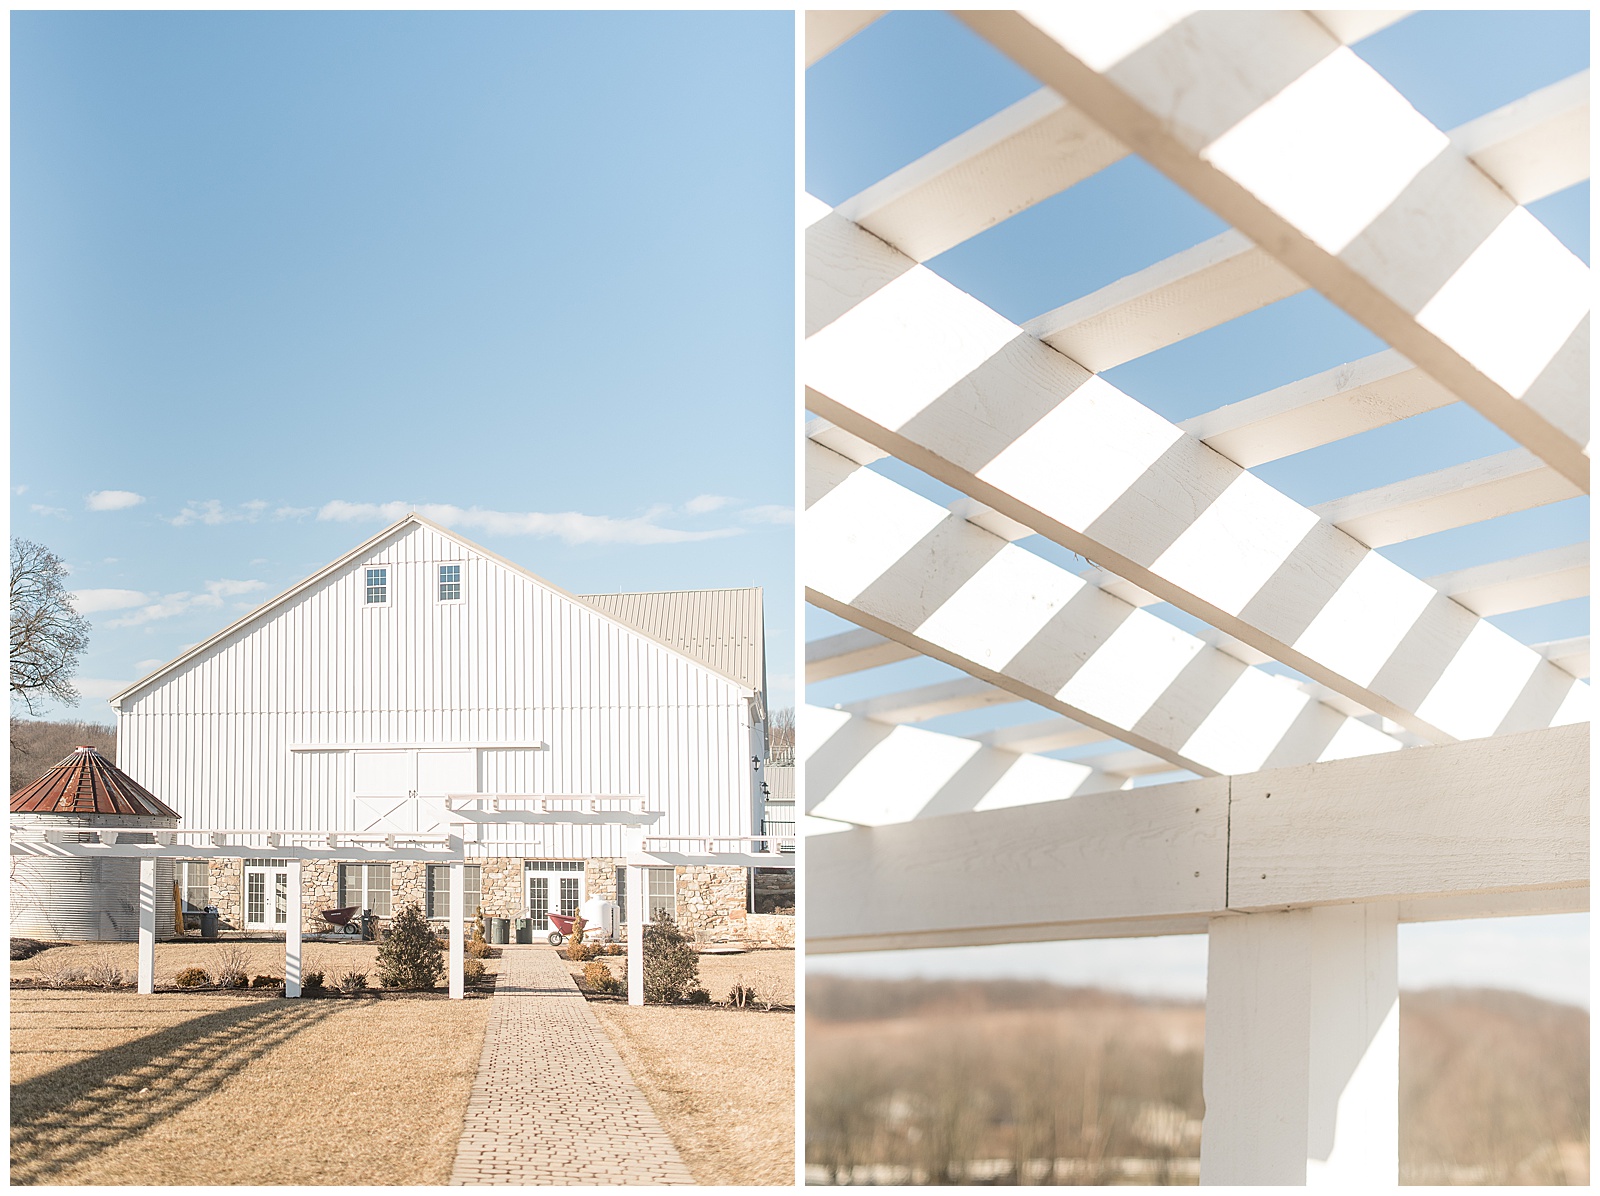 exterior photo of white wooden archway with light brick pathway leading to it and large white barn with stone bottom in background and metal with rusted roof small grain bin to the left of barn and blue sky in the background at The Barn at Stoneybrooke in Atglen, PA, close up photo of white trellis of white wooden archway overhead with trees and sky in the background at The Barn at Stoneybrooke in Atglen, PA